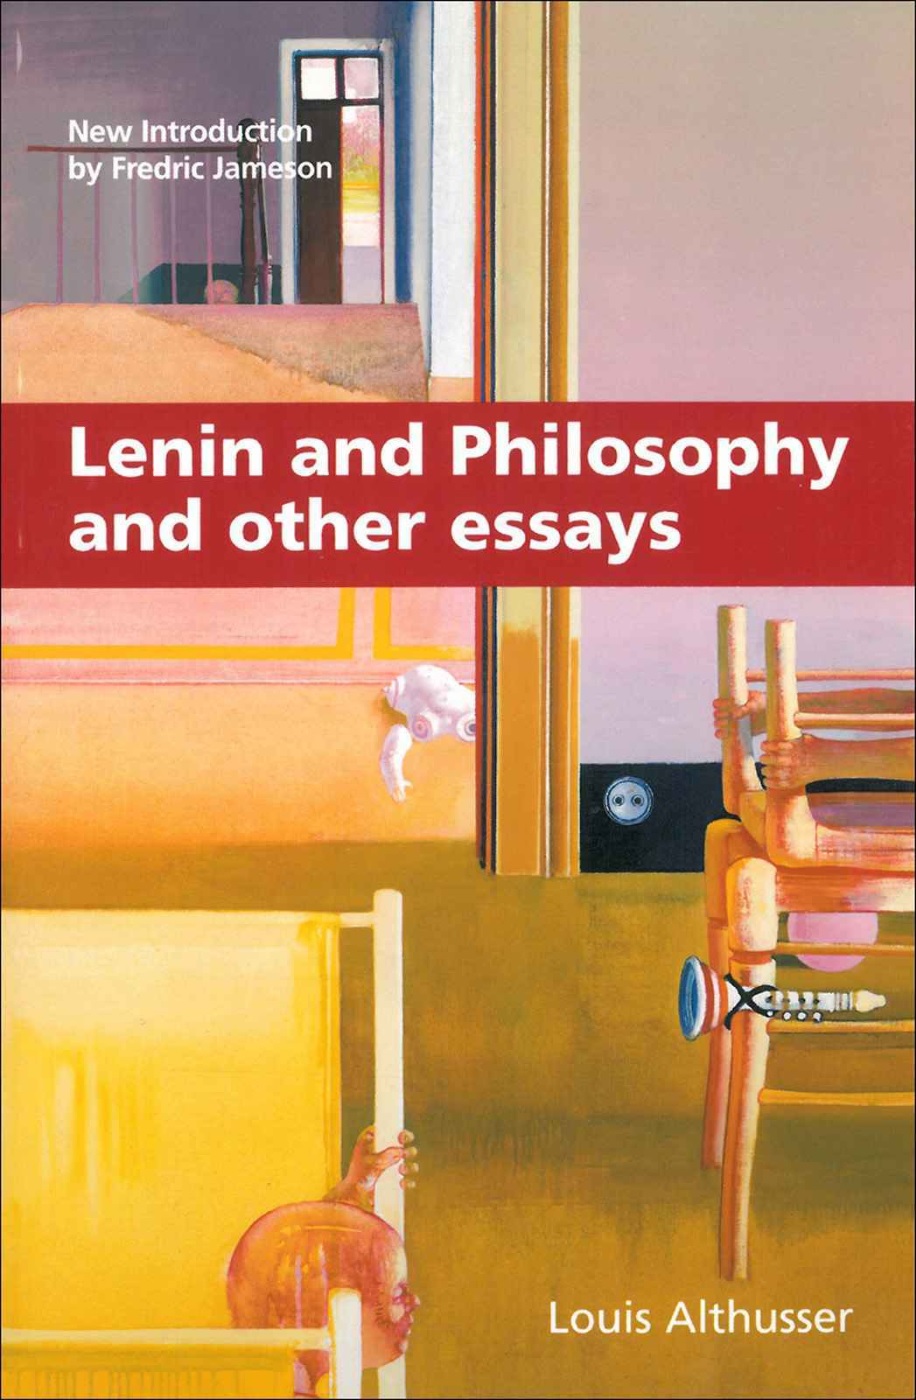 Louis-althusser-lenin-and-philosophy-and-other-essays-theoryleaks.jpg